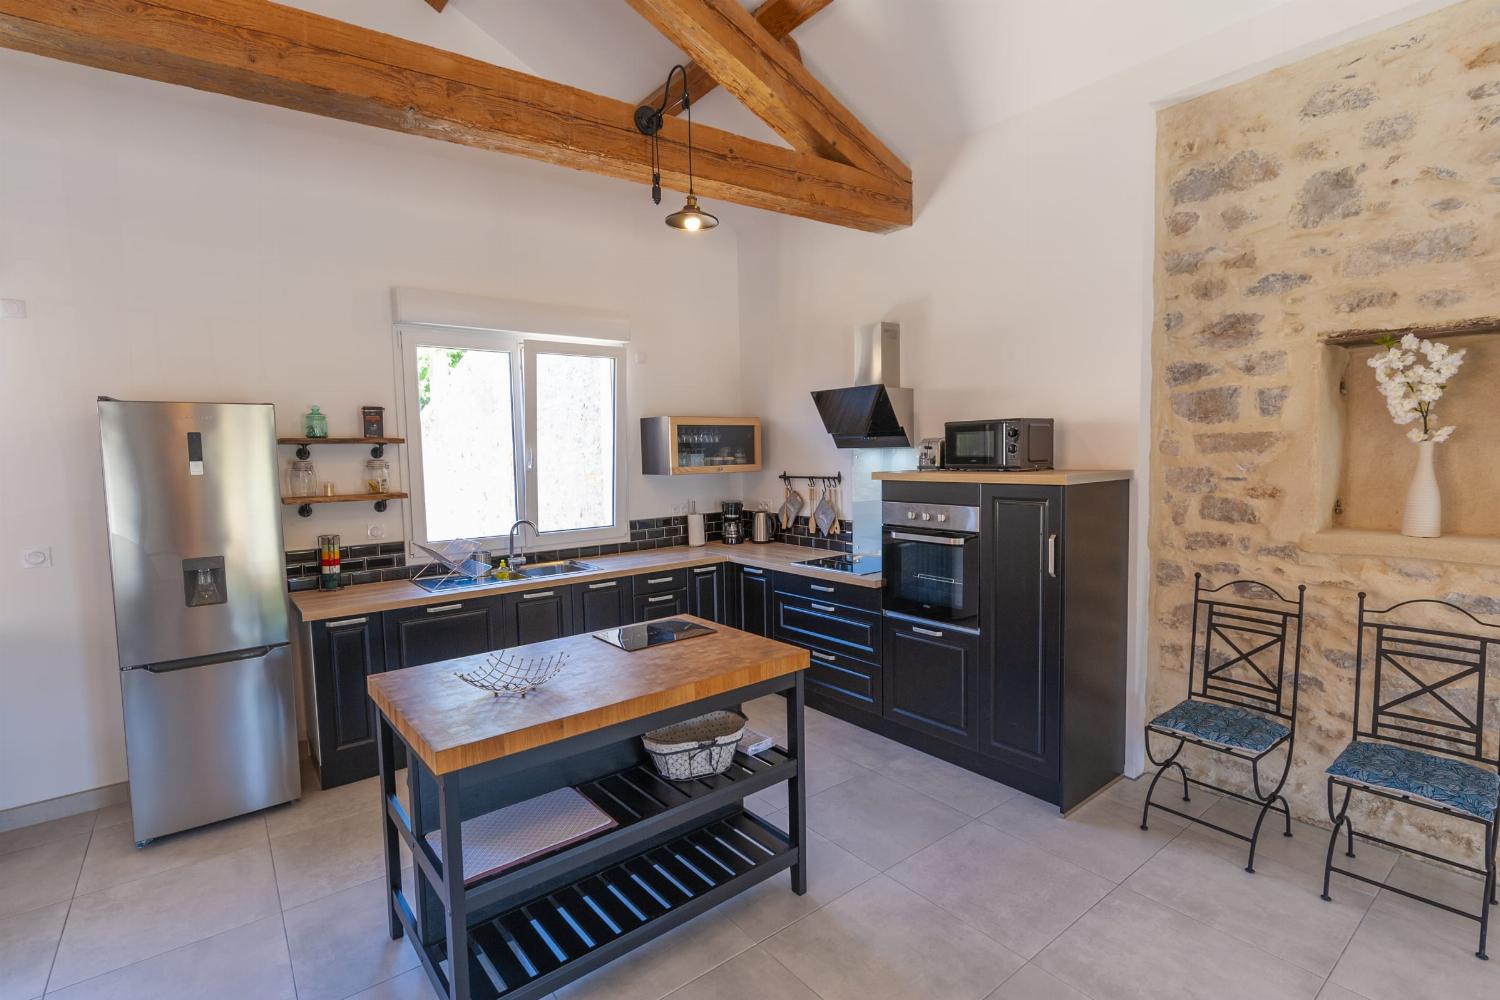 Kitchen | Vacation home in the South of France